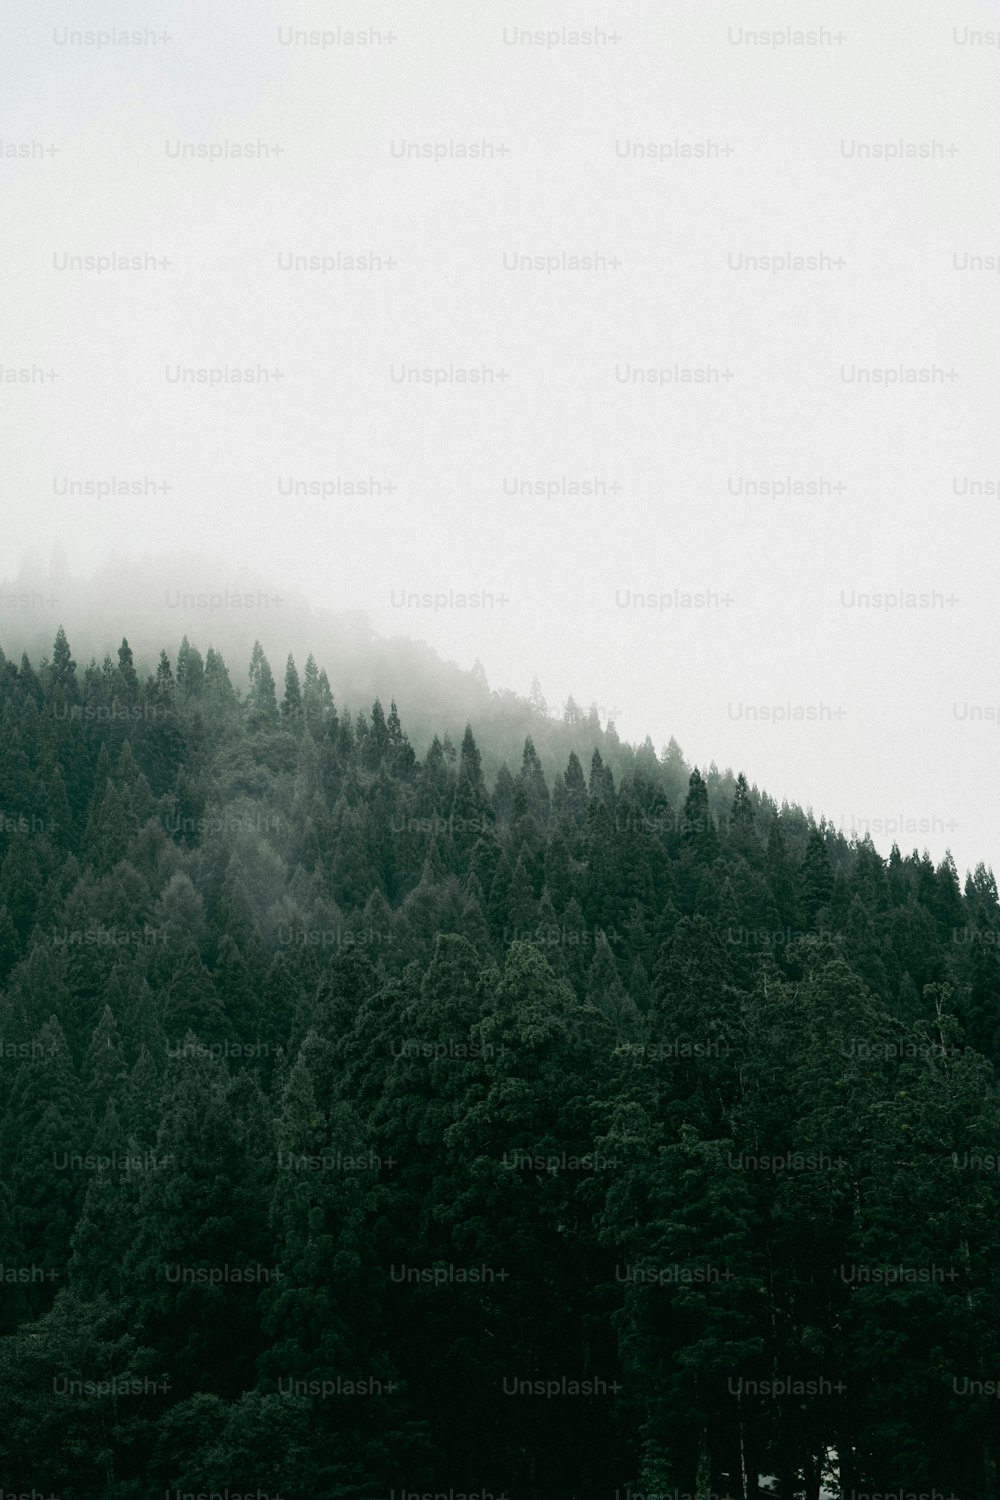 a mountain covered in fog with trees in the foreground